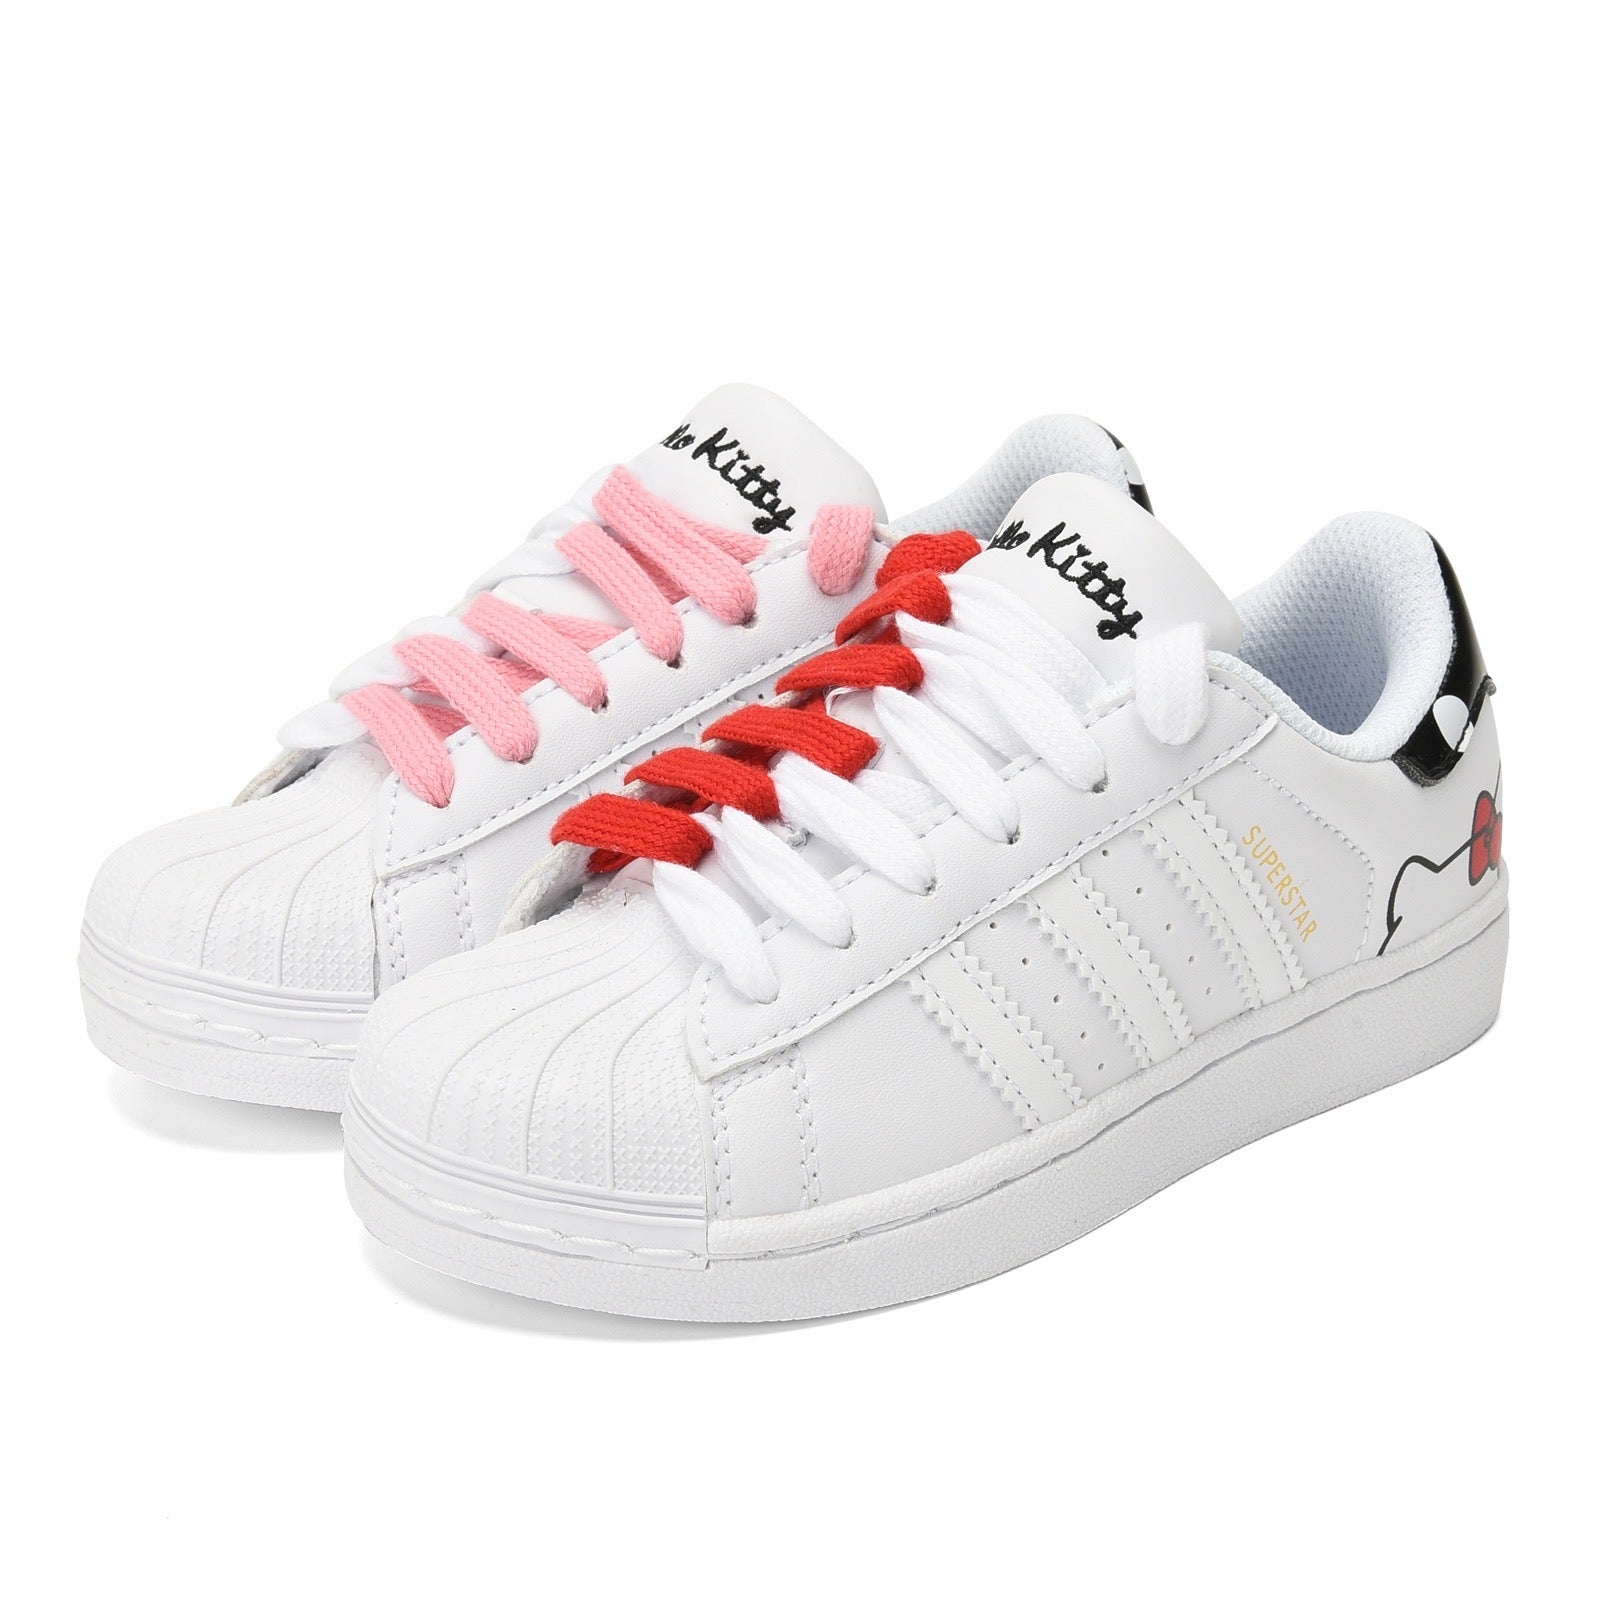 Adidas superstar hello kitty shoes